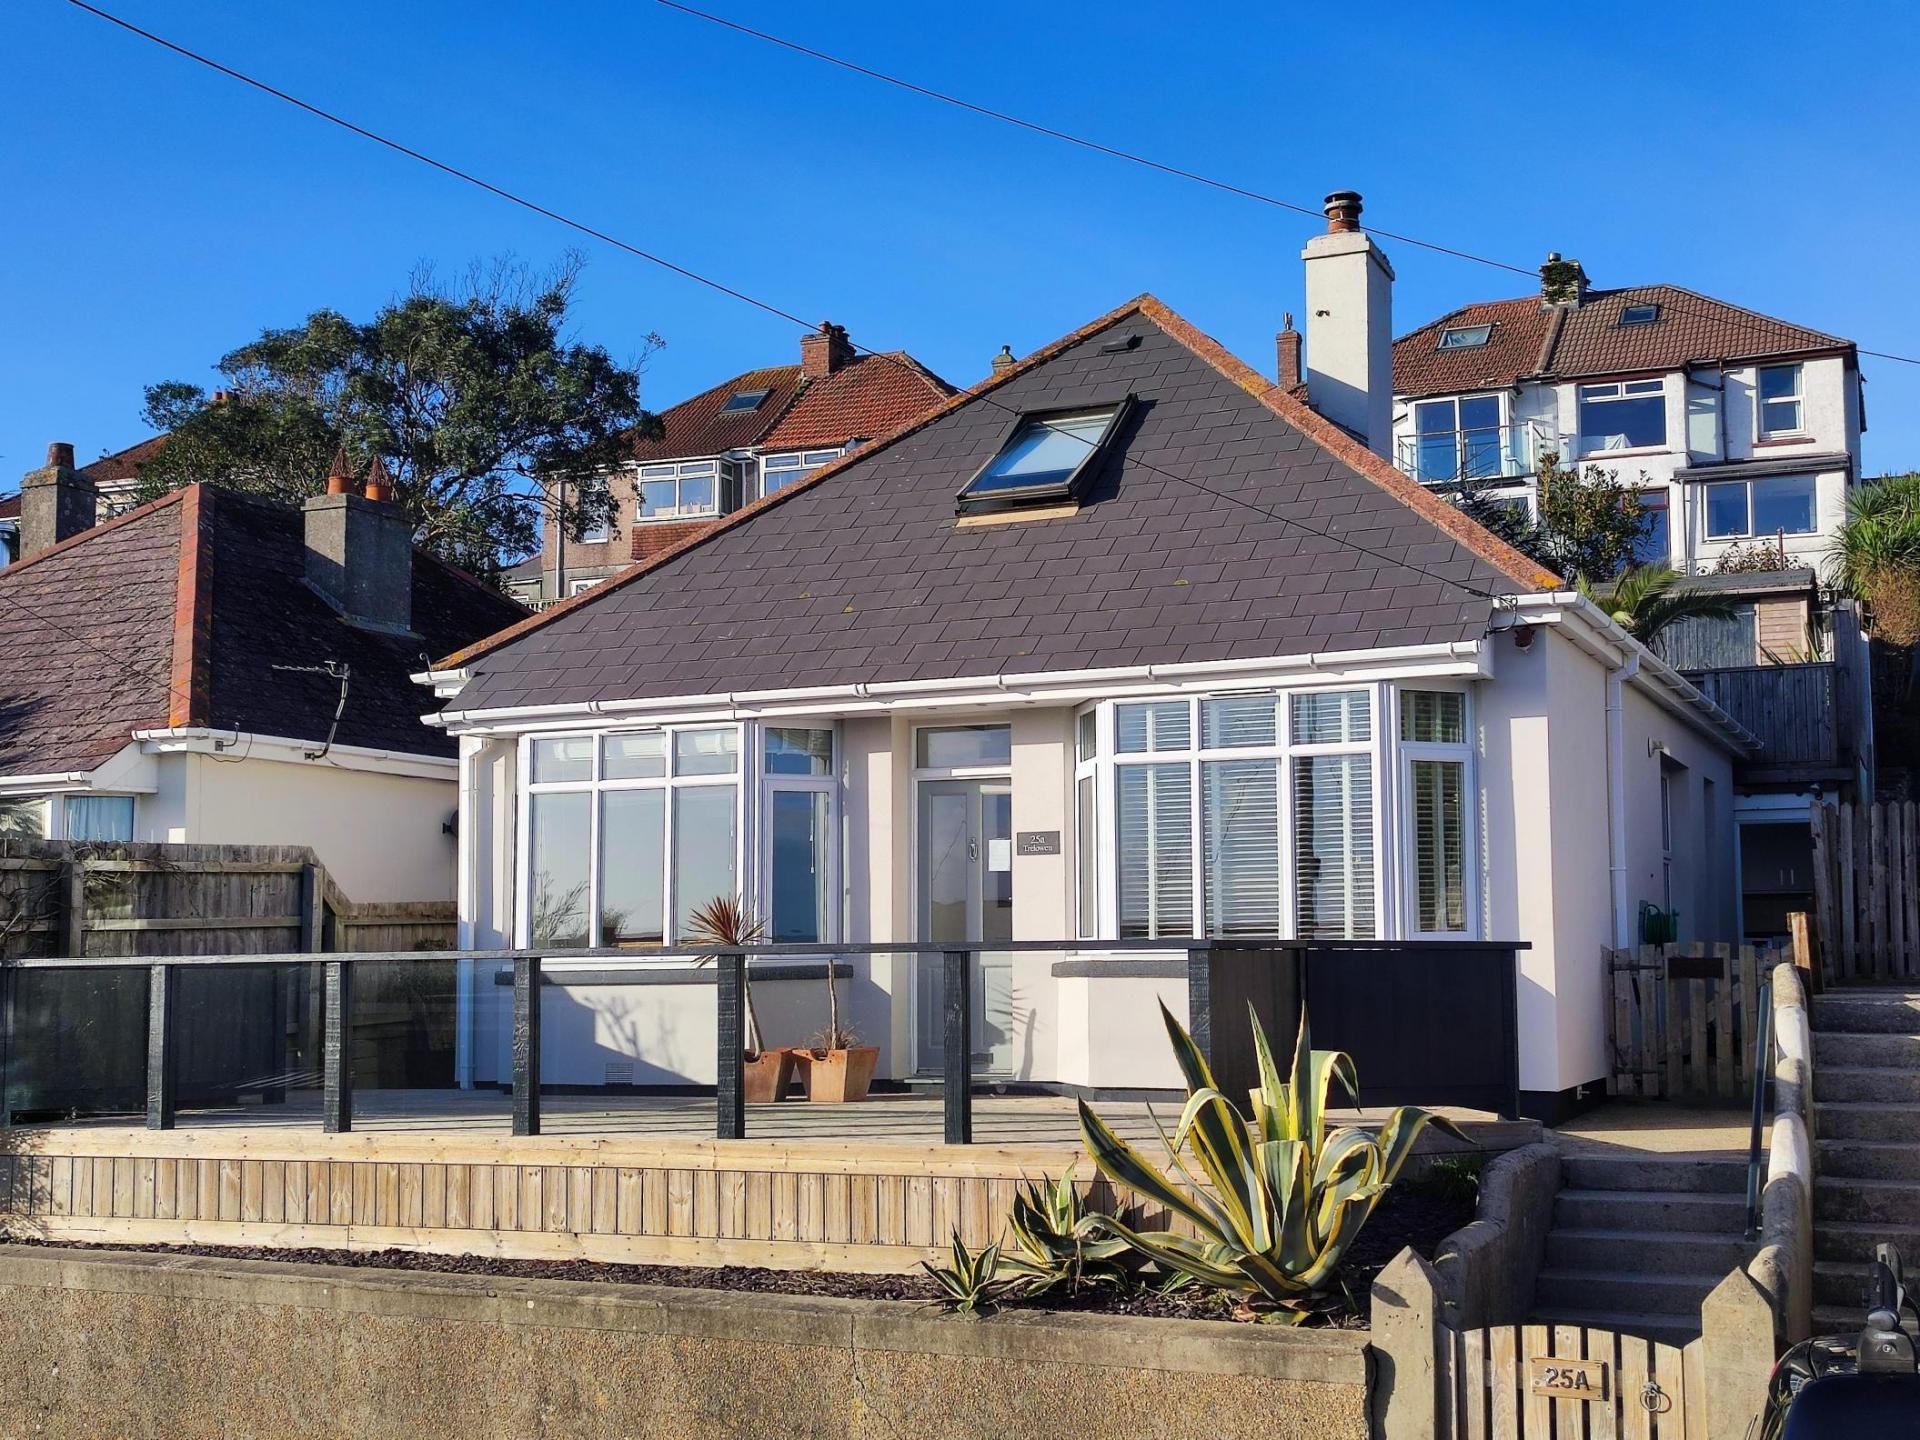 3 Bedroom Bungalow for sale in Newquay